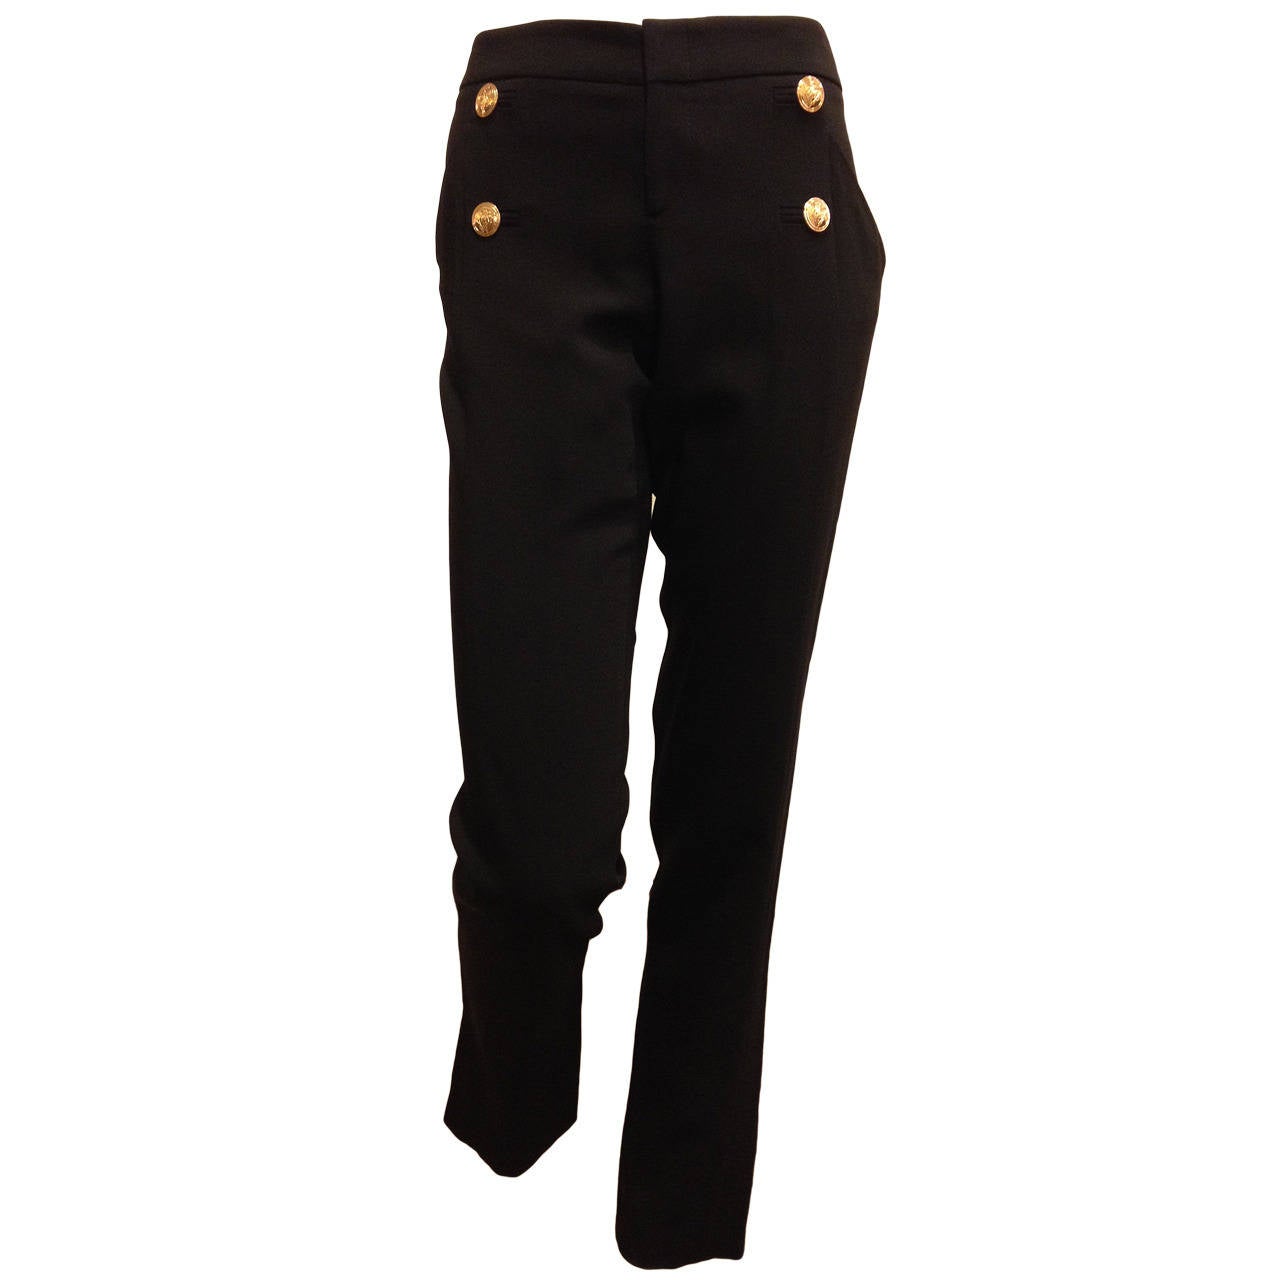 Gucci Black Slacks with Gold Buttons